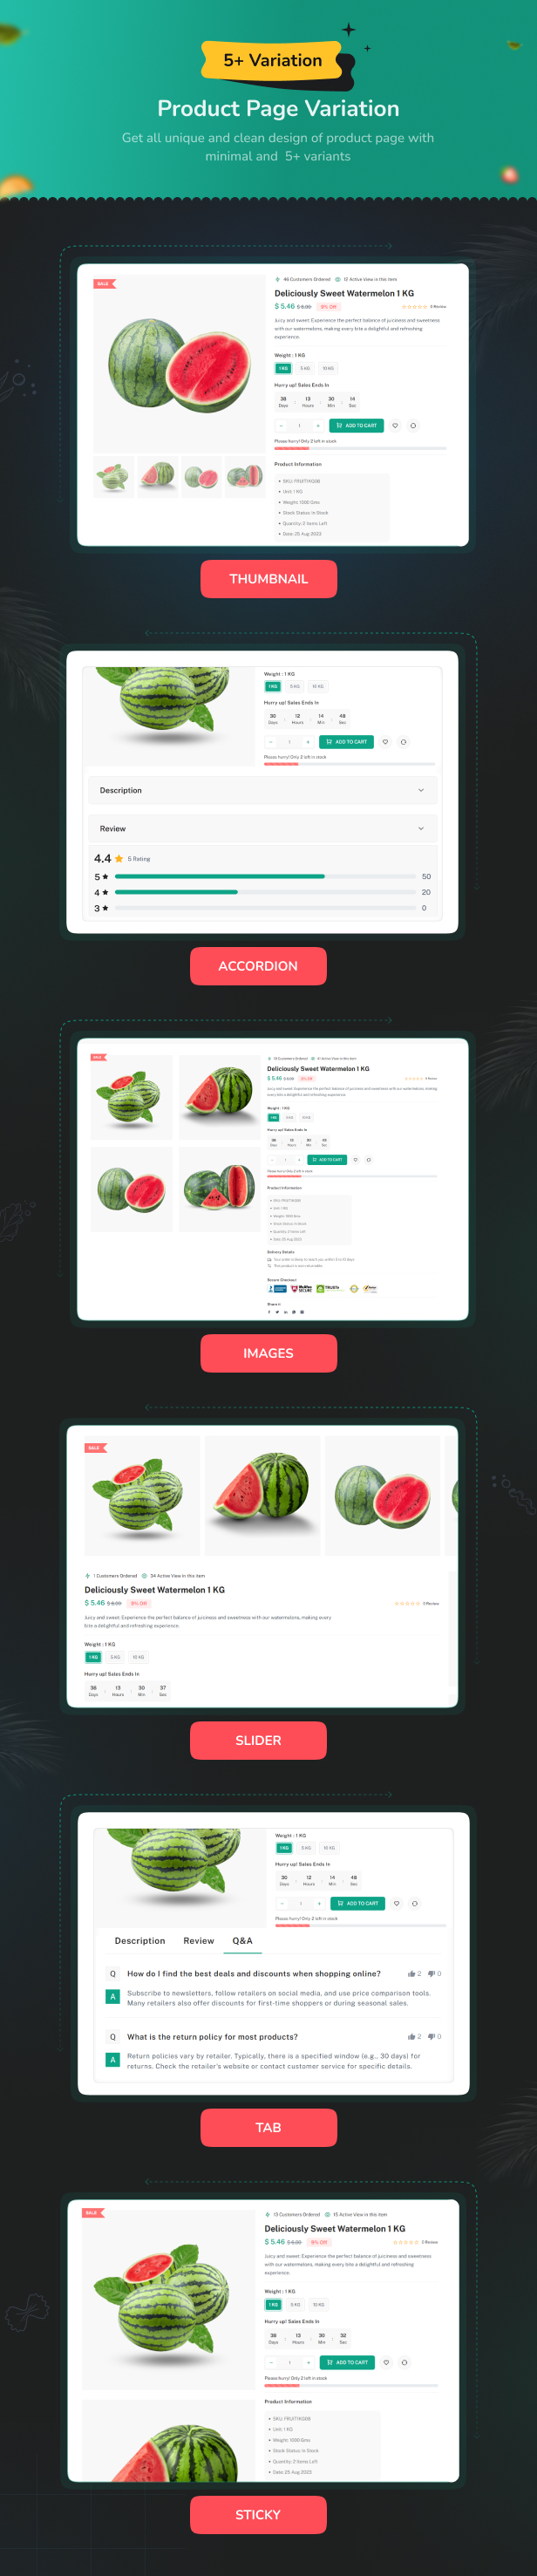 Fastkart - Ecommerce template with Nuxt Js